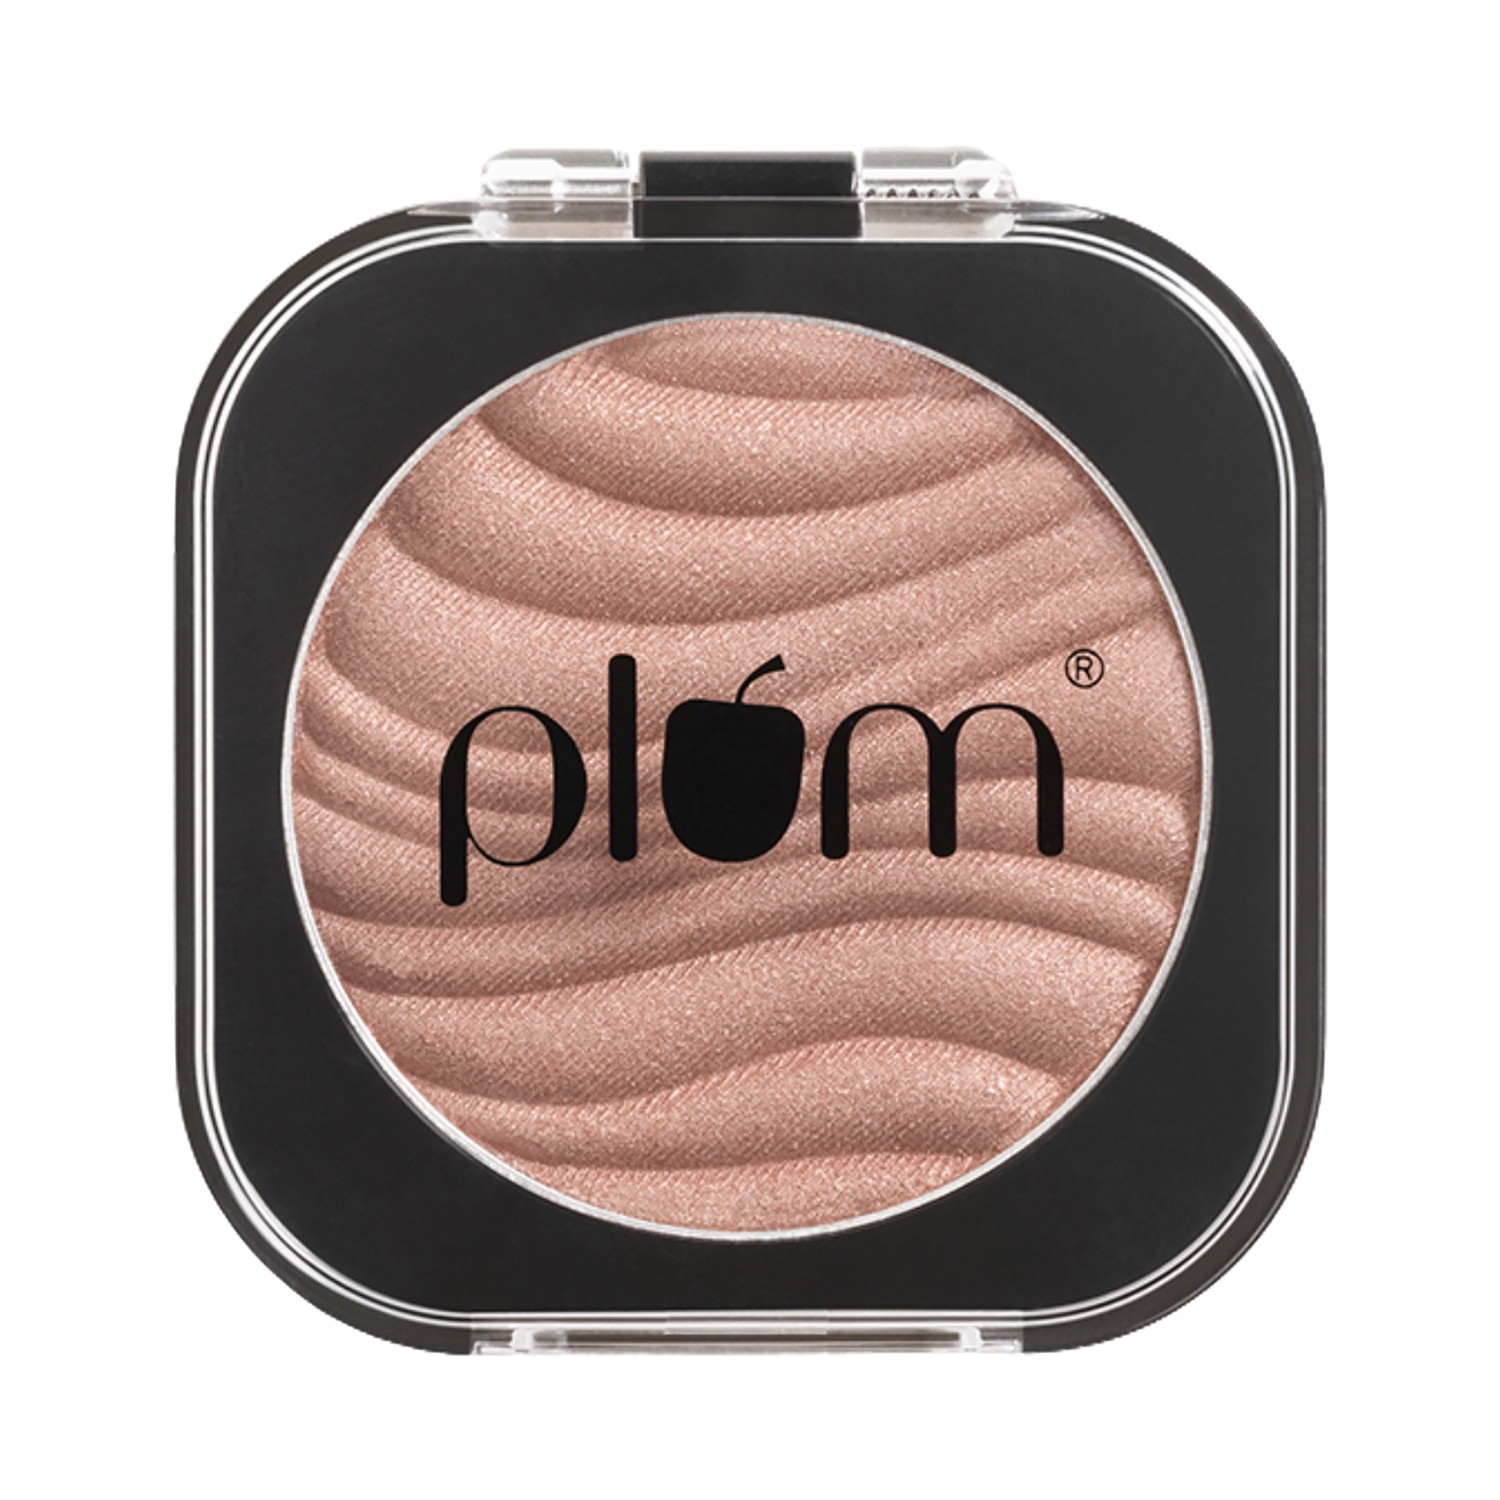 Plum | Plum There You Glow Highlighter - 123 Rose N' Shine (4.5g)